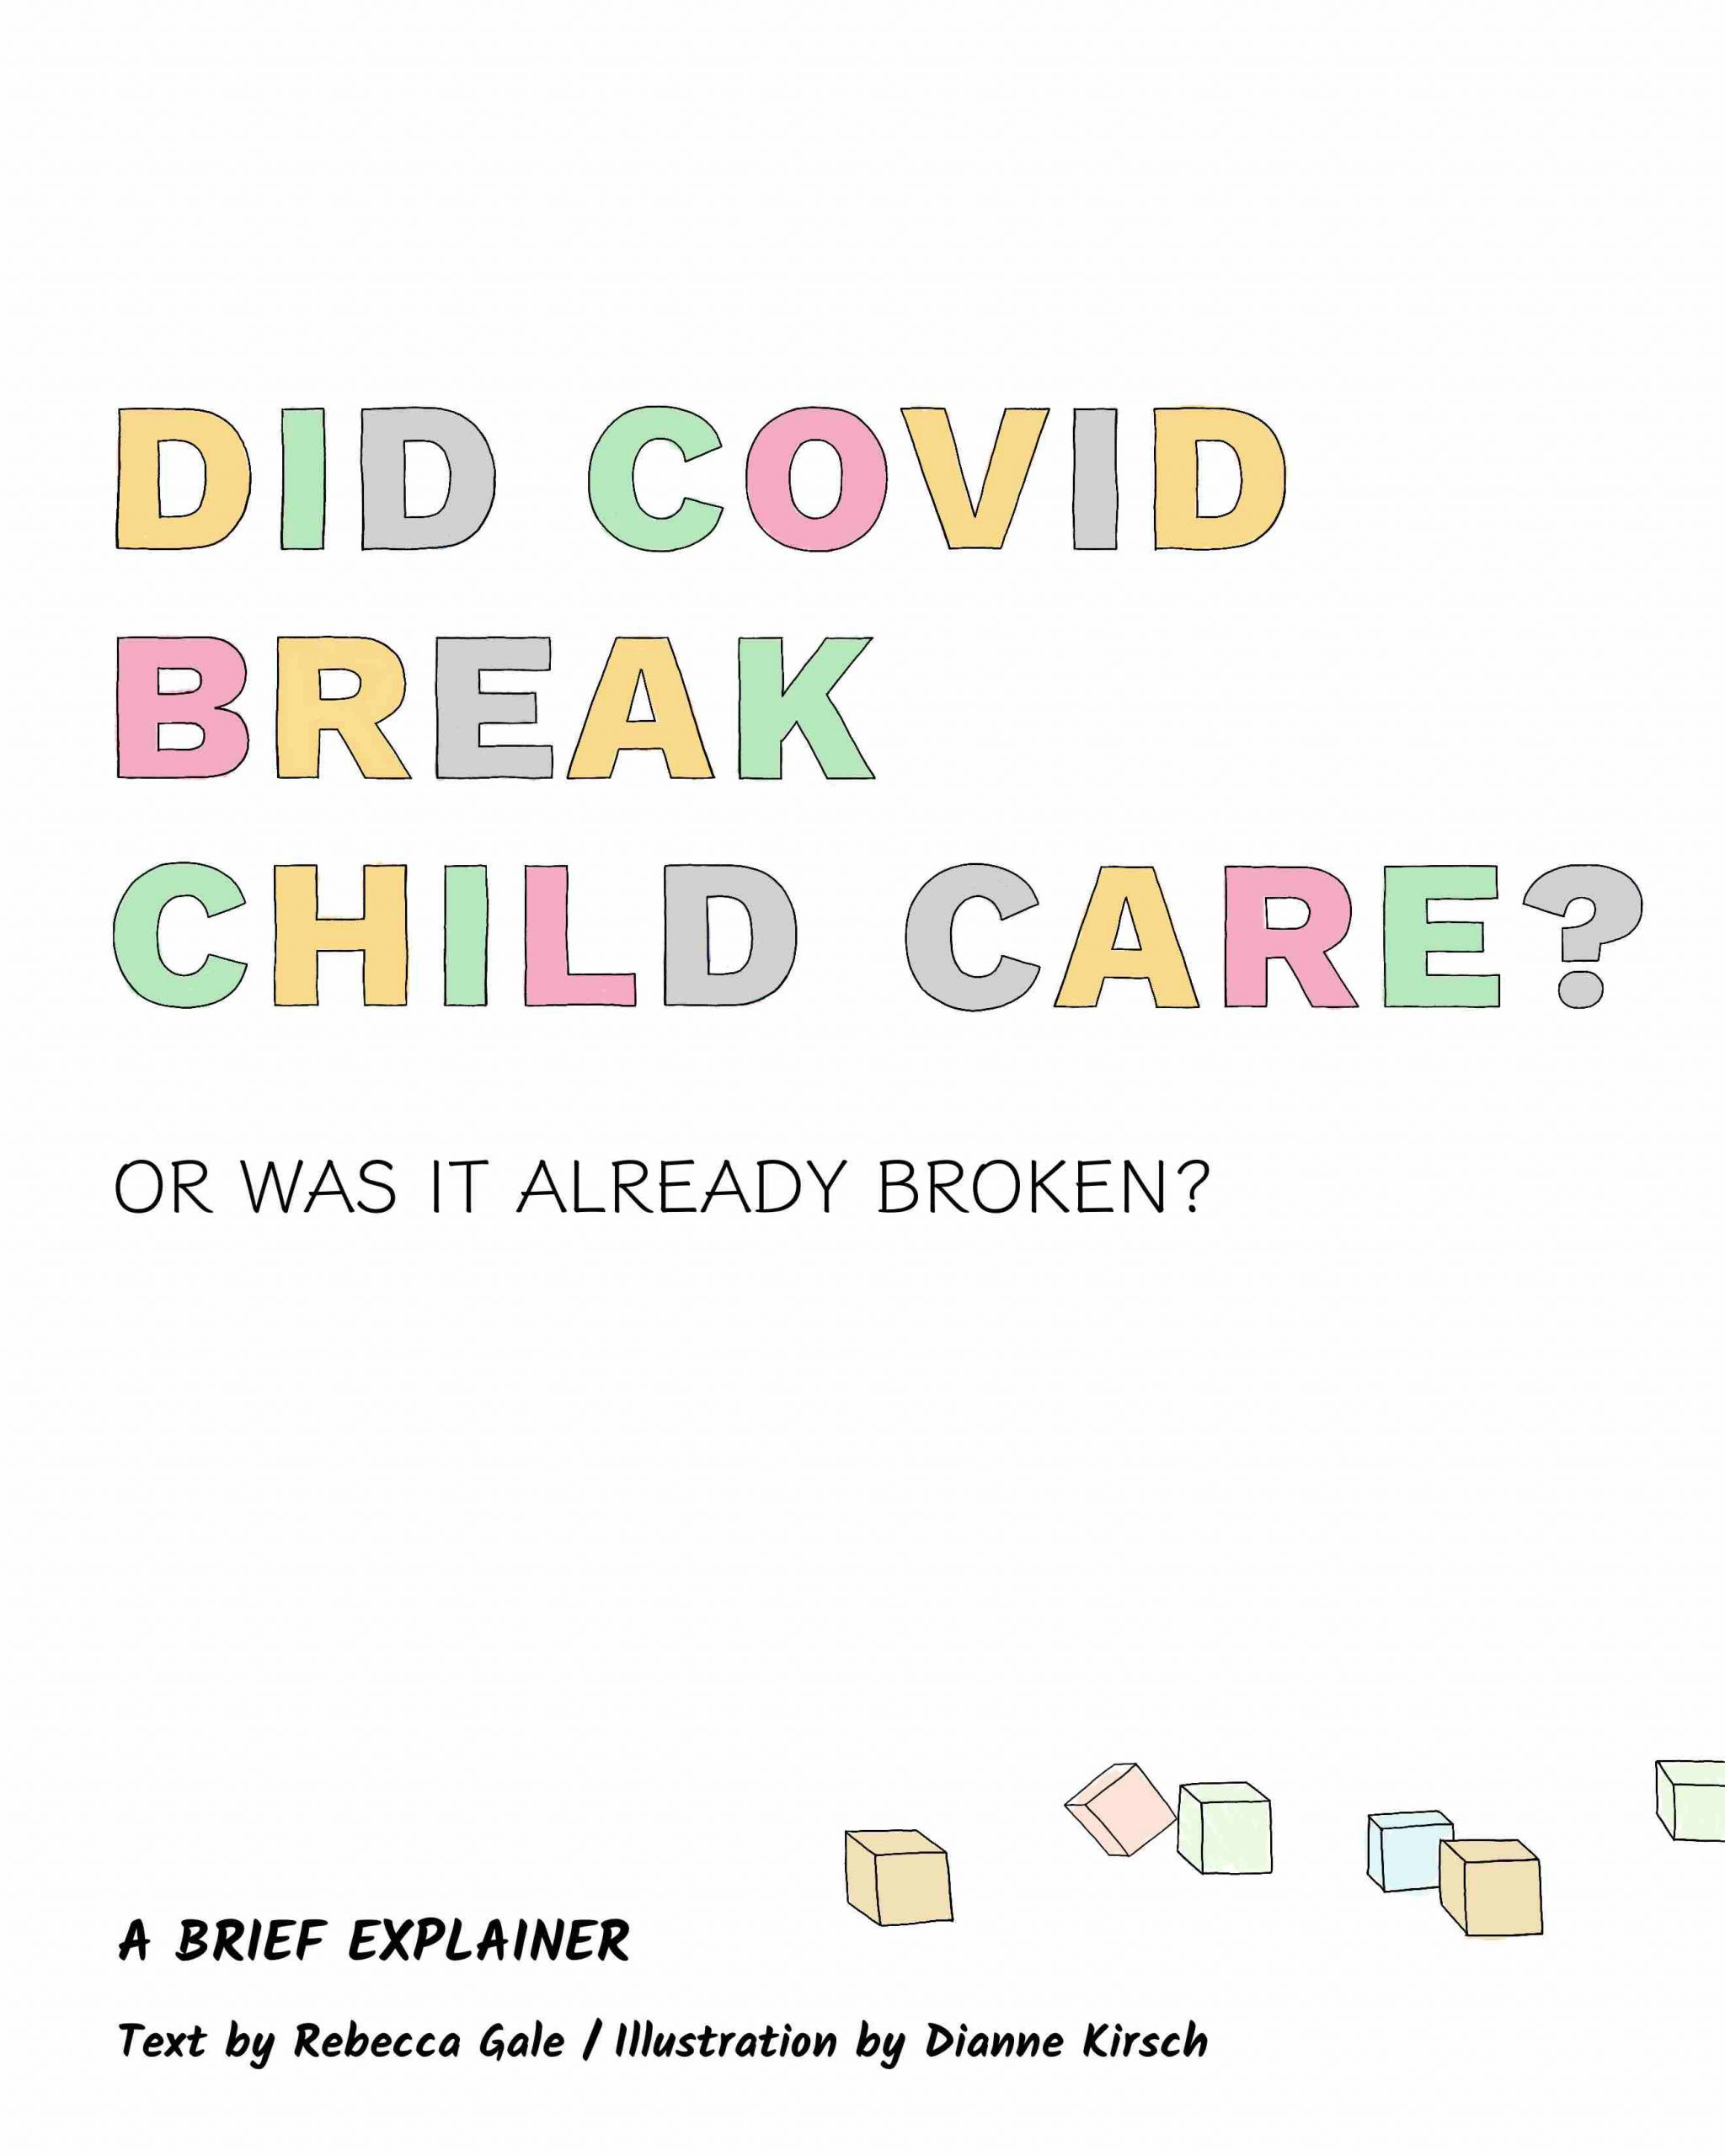 DID COVID BREAK CHILD CARE OR WAS IT ALREADY BROKEN? A BRIEF EXPLAINER Text by Rebecca Gale/ Illustration by Dianne Kirsch